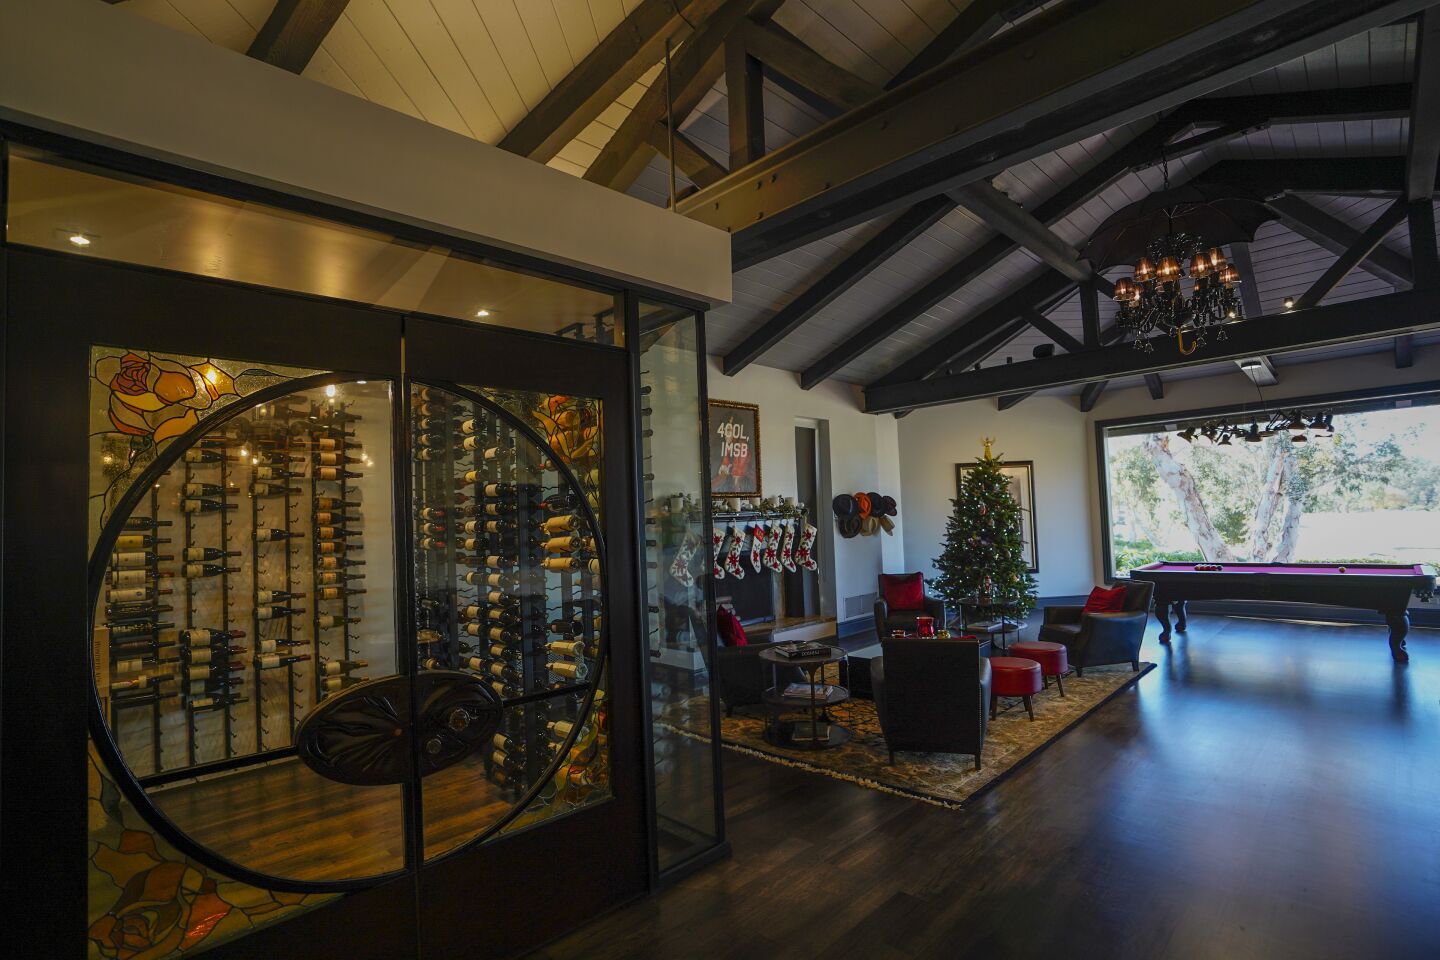 A newly built Rancho Santa Fe home on the market for $6 million comes with its own hidden speakeasy.